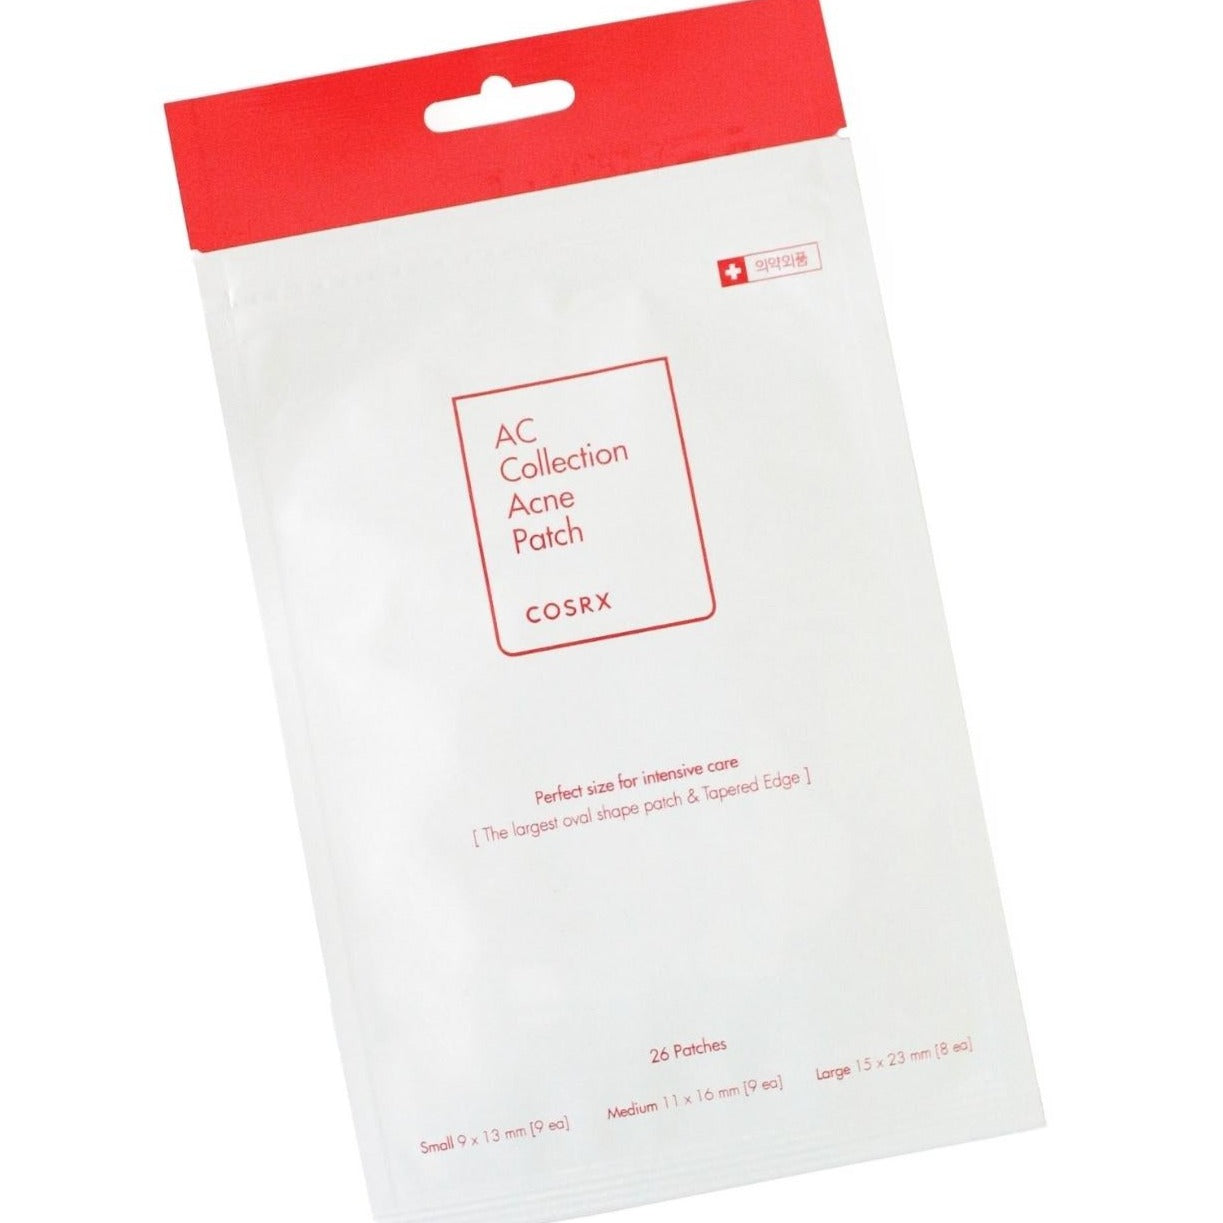 COSrx | AC Collection Acne Patch (26 patches)